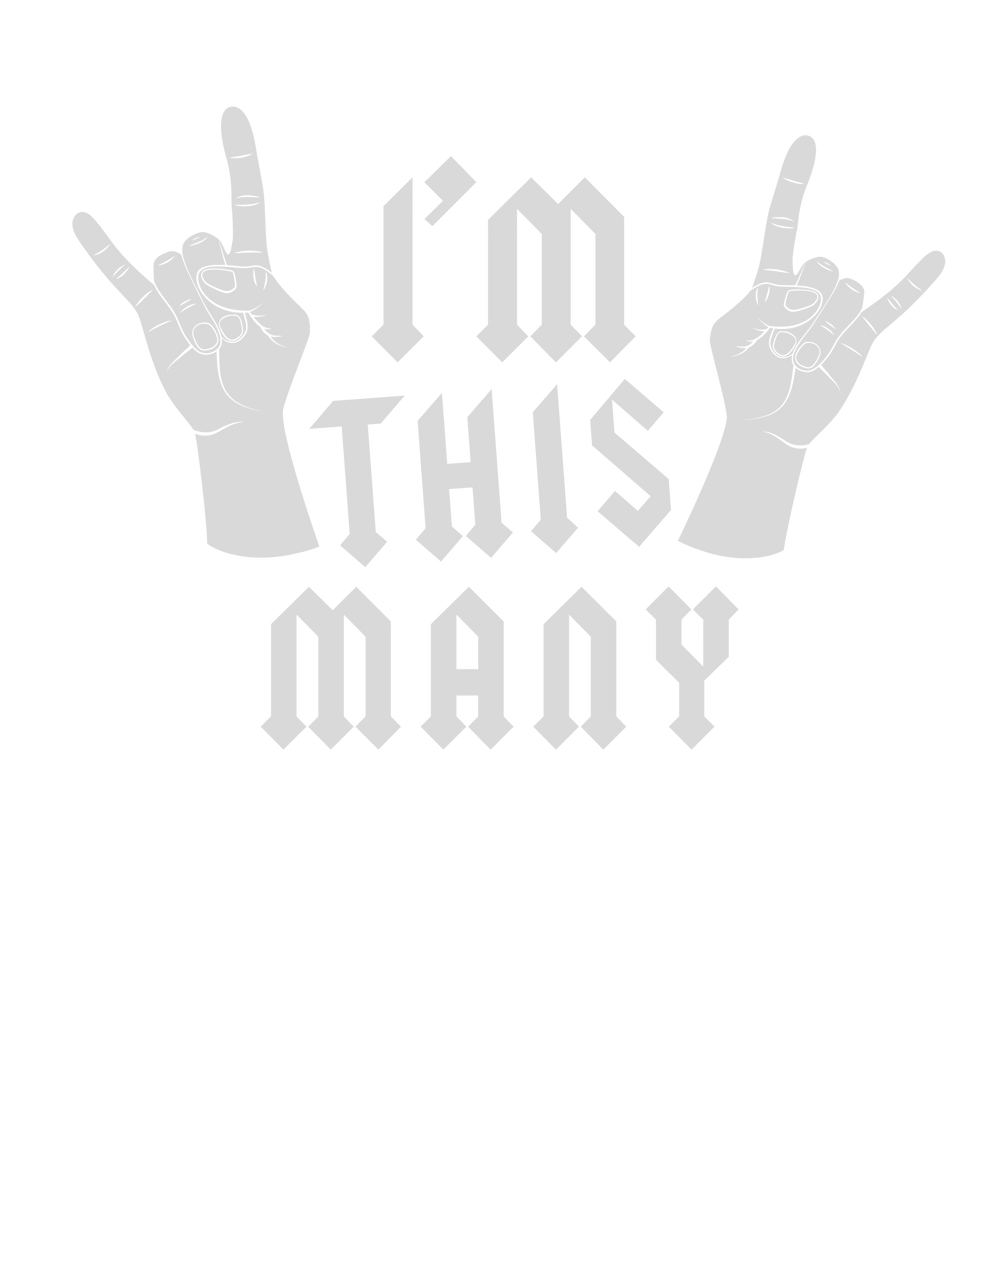 A black and white toddler tee featuring hands making a gesture, ideal for sensitive skin. Made of 100% combed cotton, with a durable print. Rock and Roll I'm 4 Toddler Tee by Worlds Worst Tees.